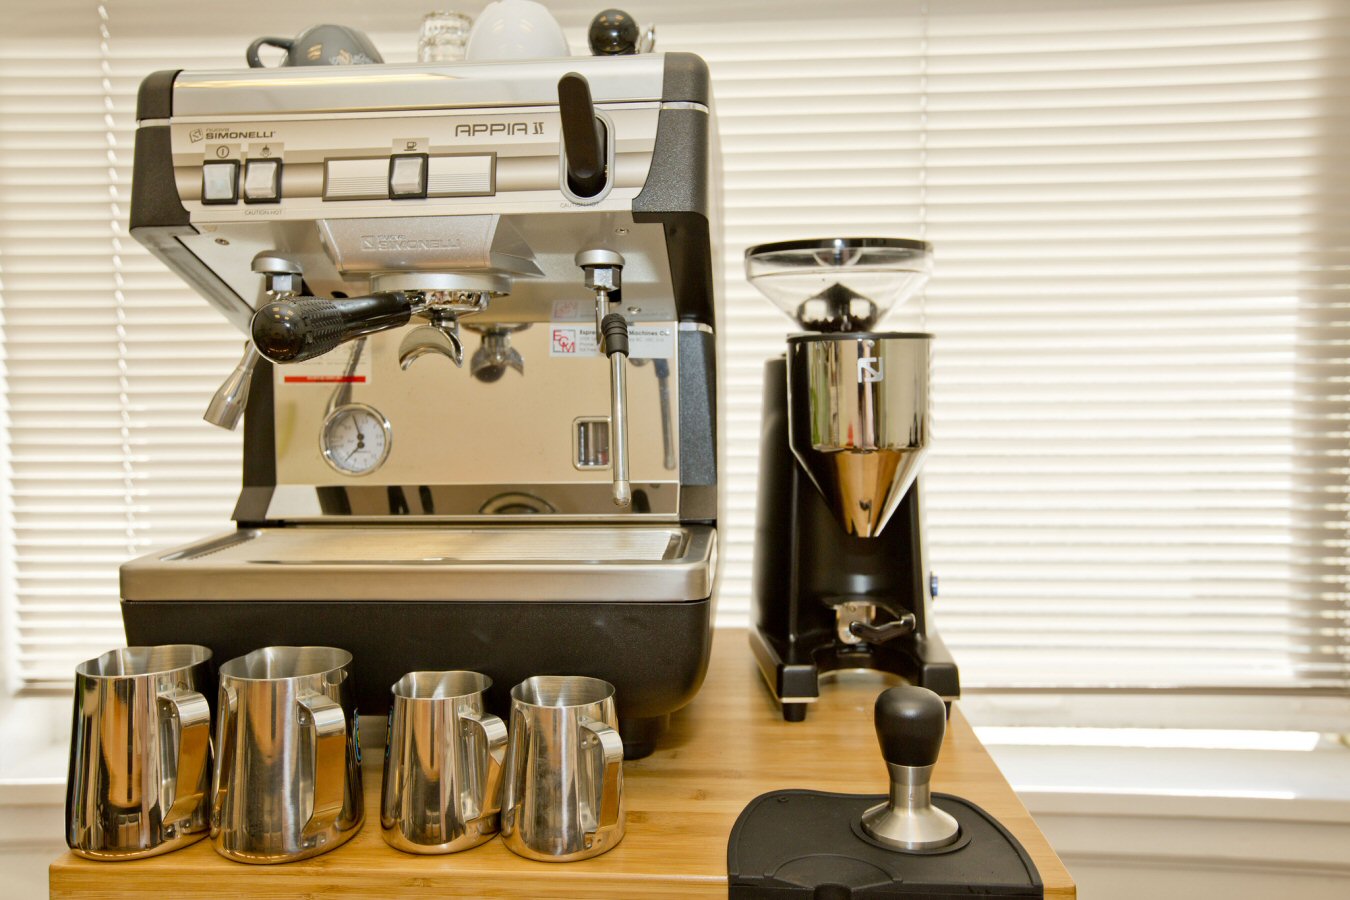 Looking for a New Coffee Maker? Here's What to Consider Before Buying